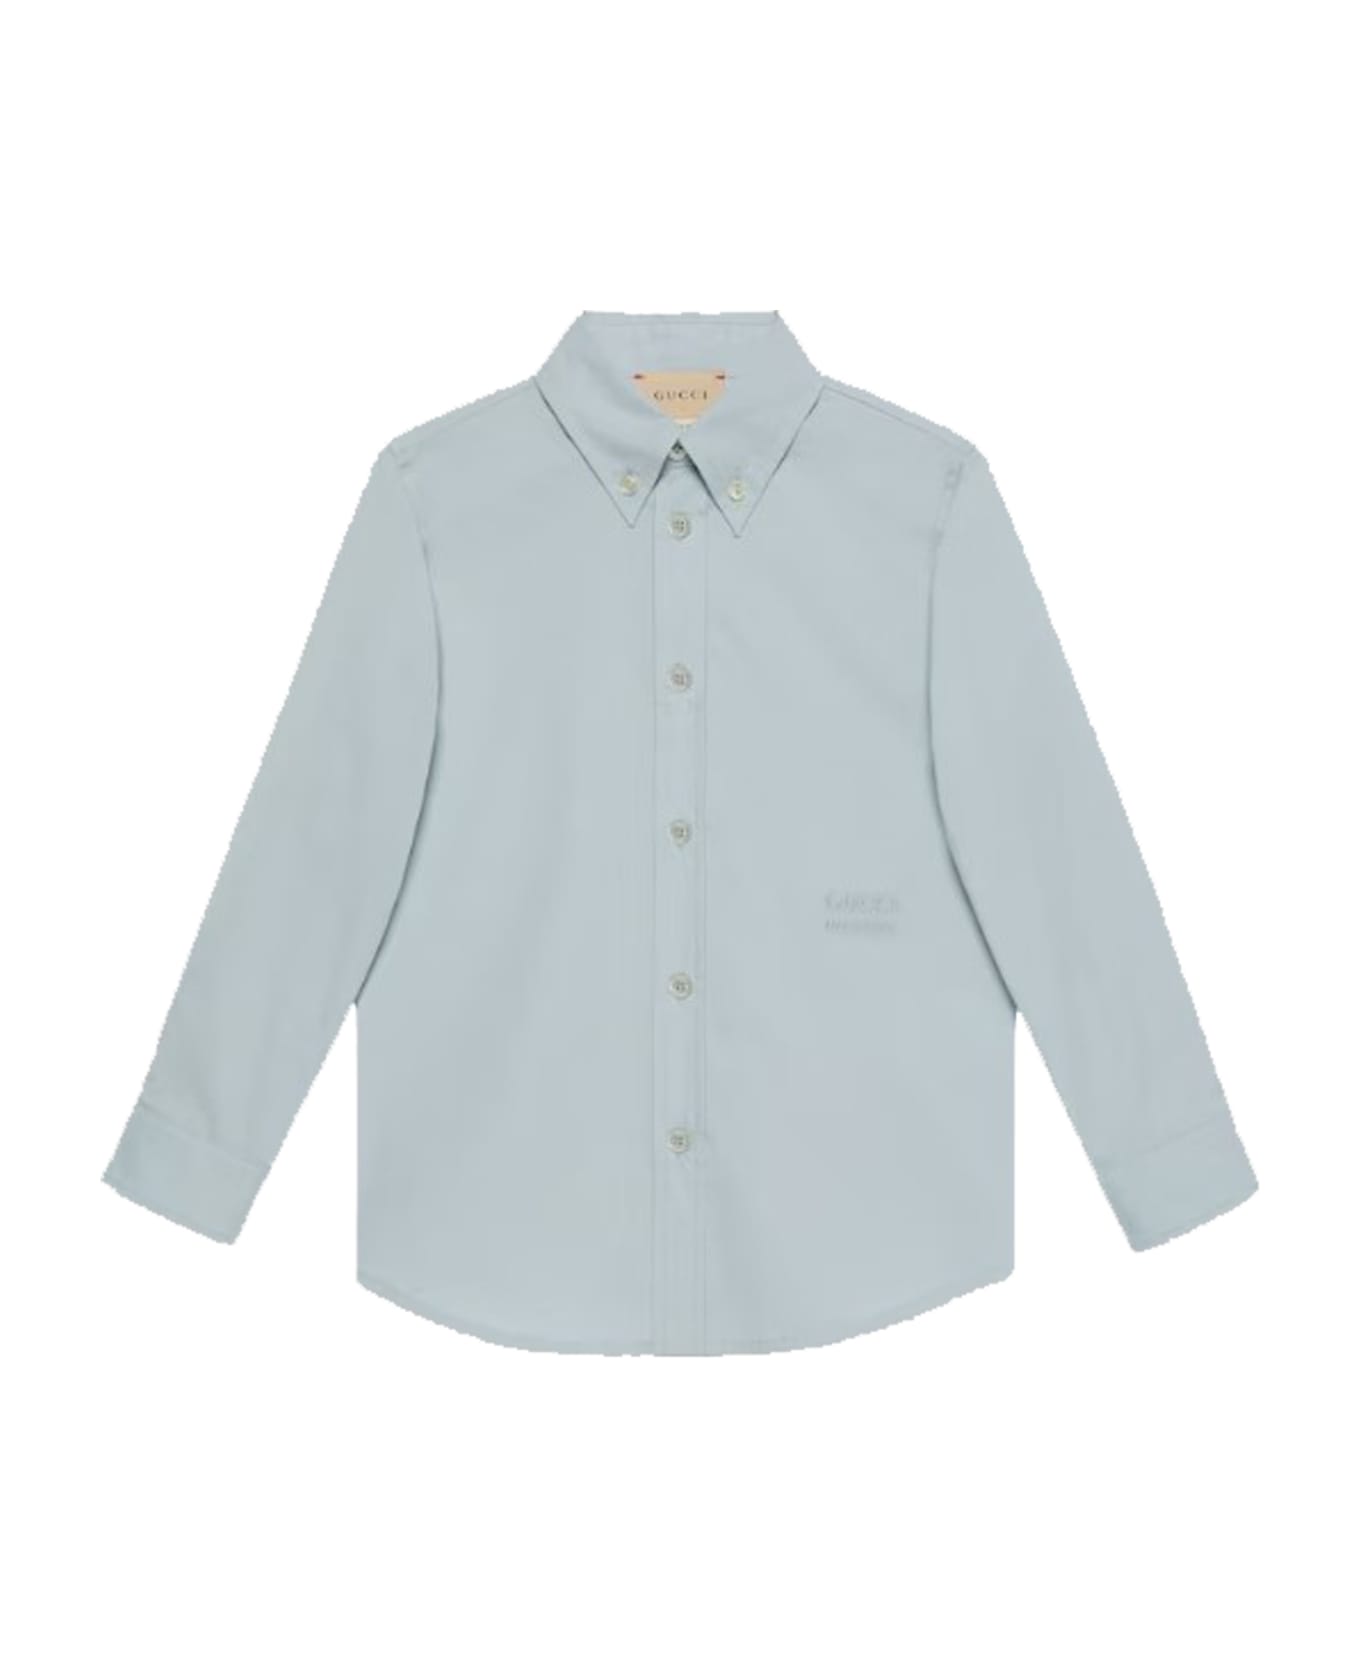 Gucci Cotton Shirt With Embroidery - Light blue